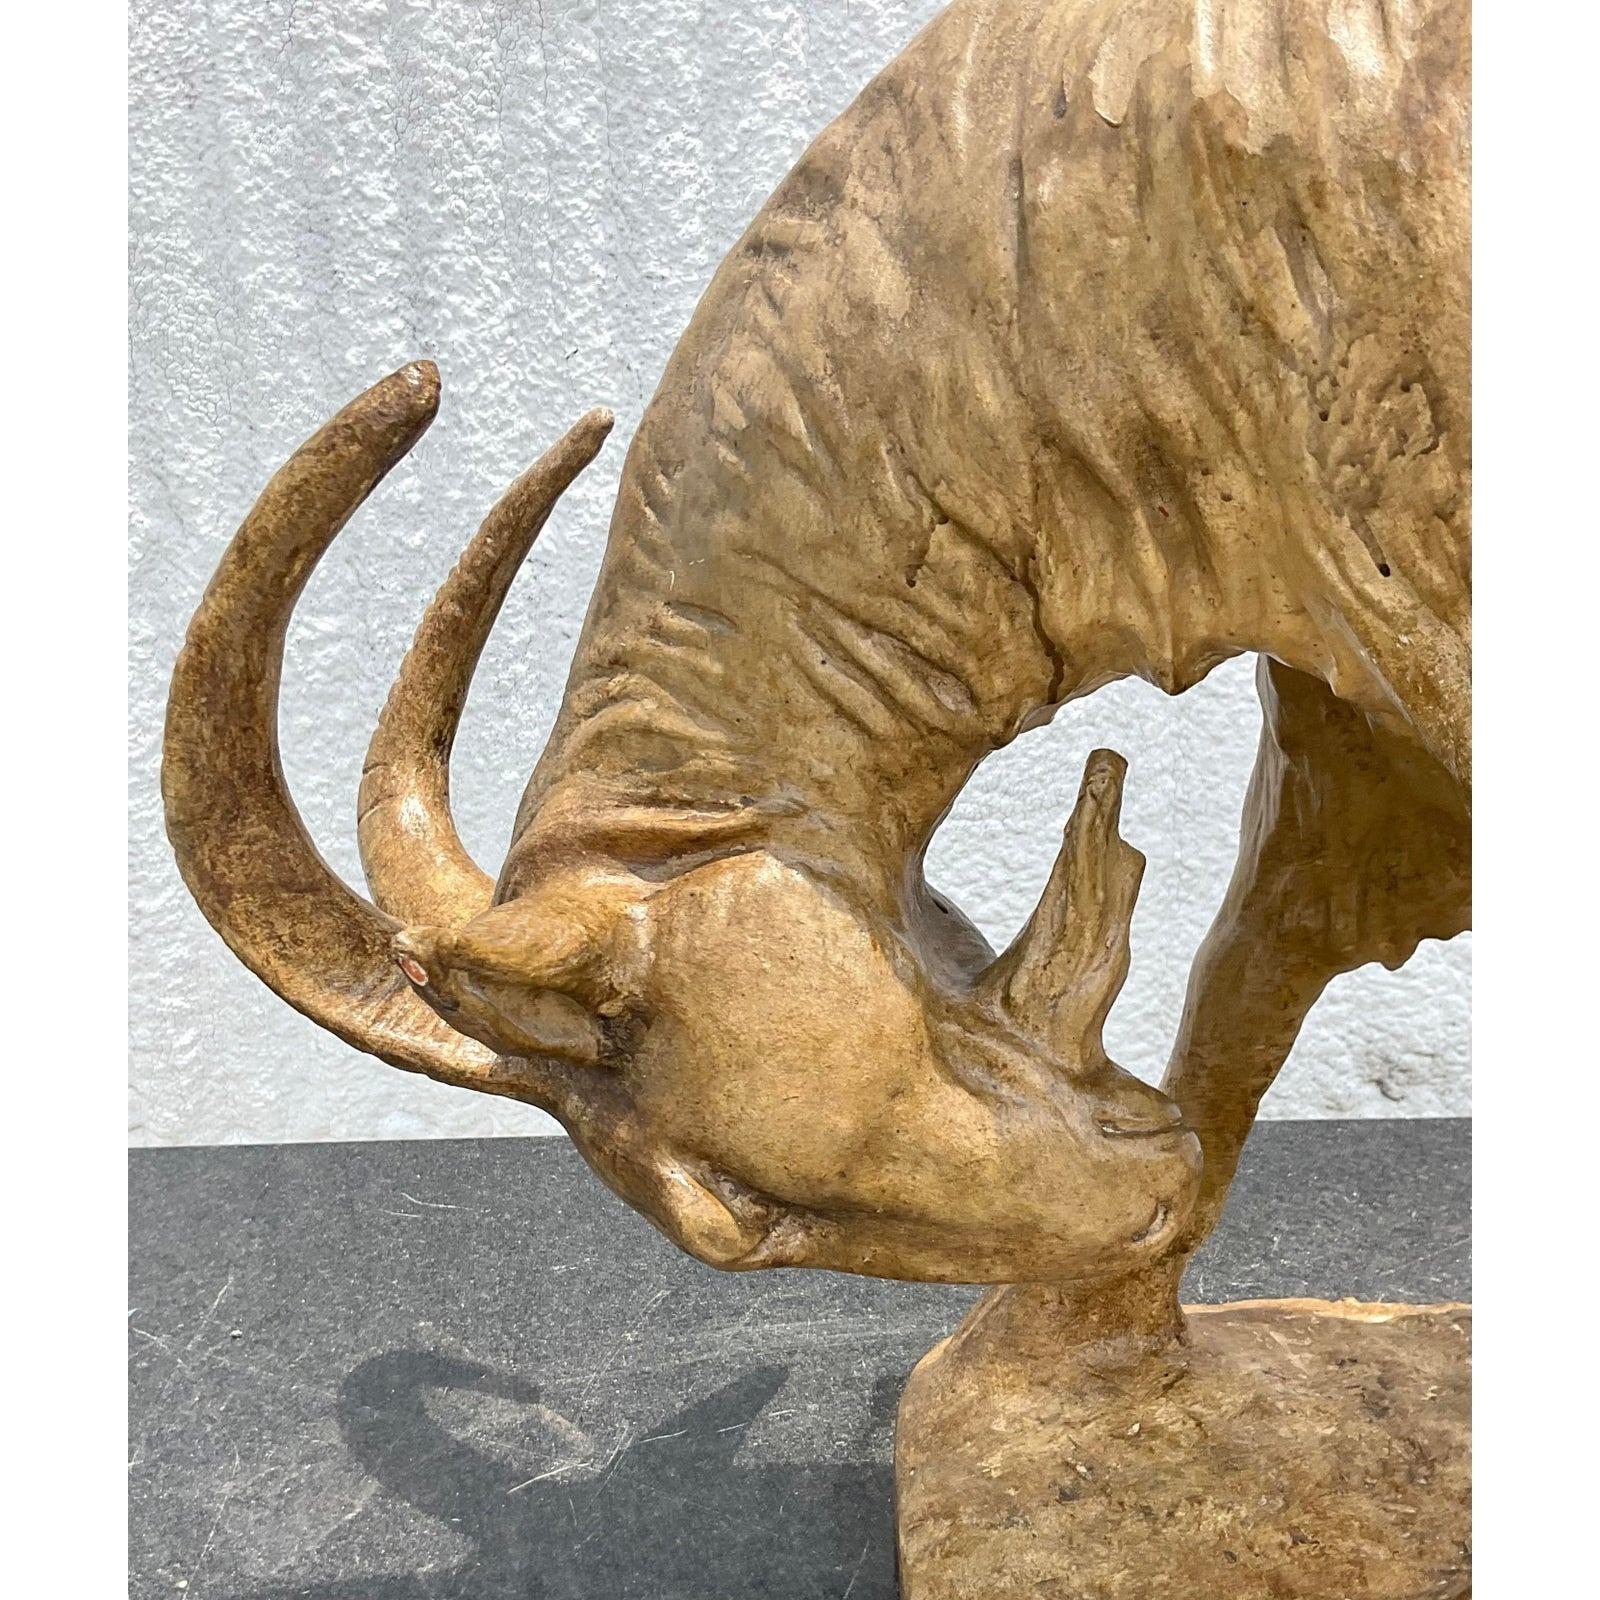 A fantastic and unique vintage terracotta goat sculpture that can add personality to any room. Acquired at a Palm Beach estate.